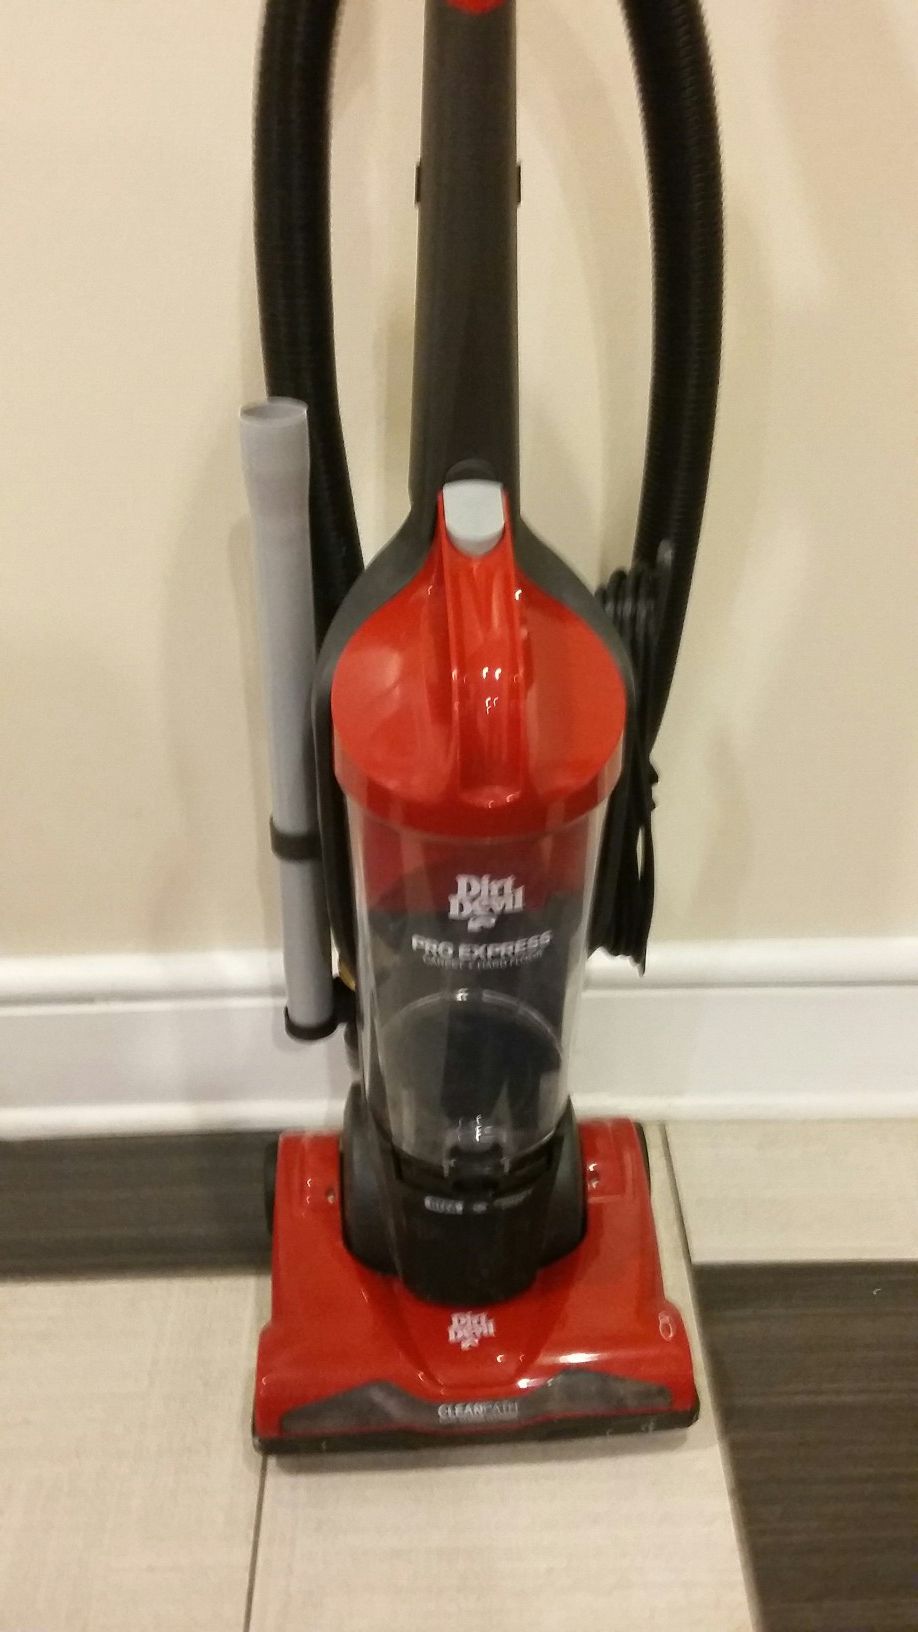 NICE DIRT DEVIL POWER EXPRESS WITH CLEANPATH EDGE TO EDGE CLEANING BAGLESS VACUUM CLEANER. LIKE NEW